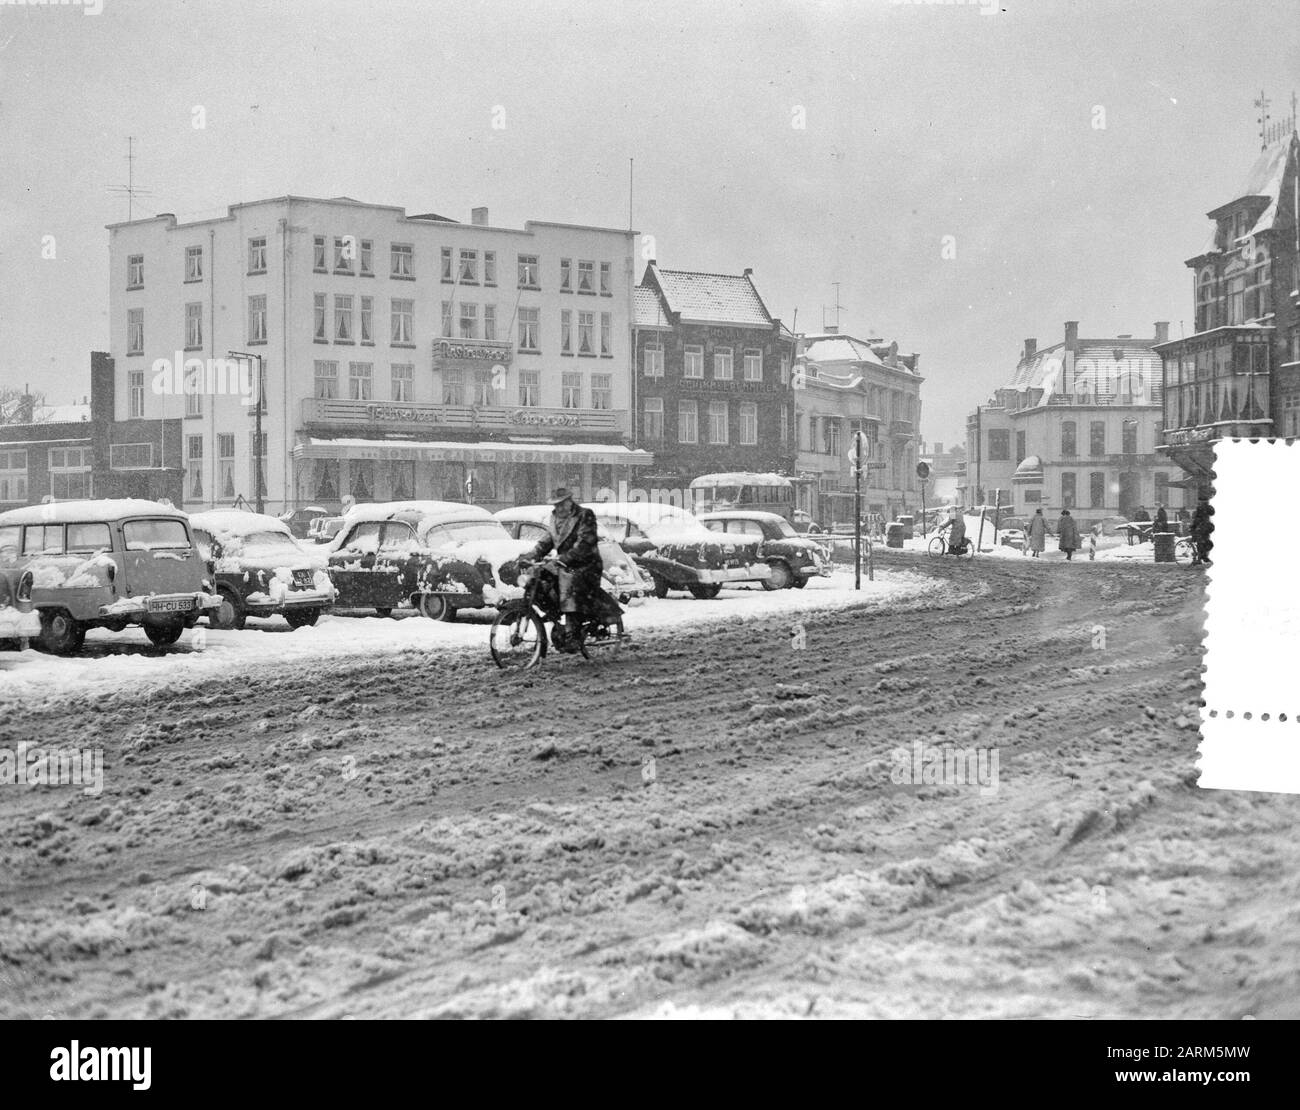 Heavy snowfall in Eindhoven Date: February 20, 1957 Location: Eindhoven Keywords: snowfall Stock Photo